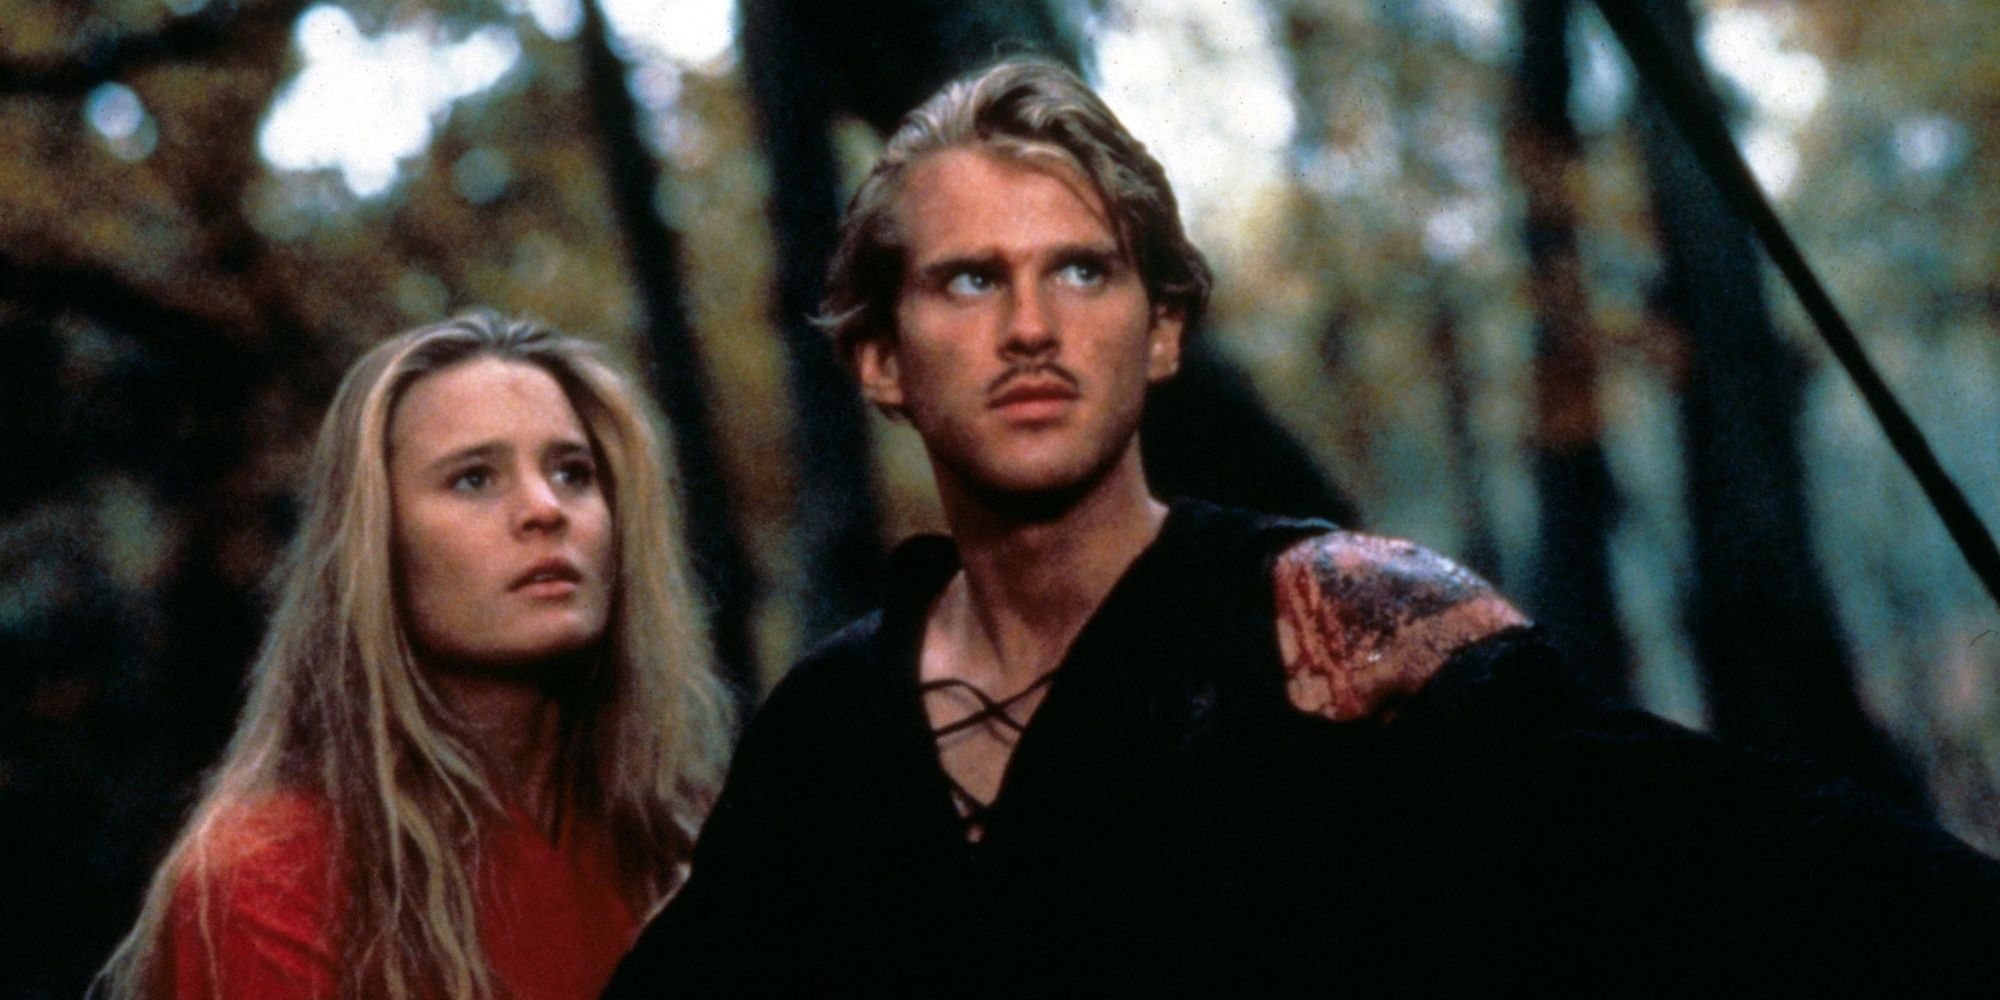 Princess Buttercup and Westley in The Princess Bride